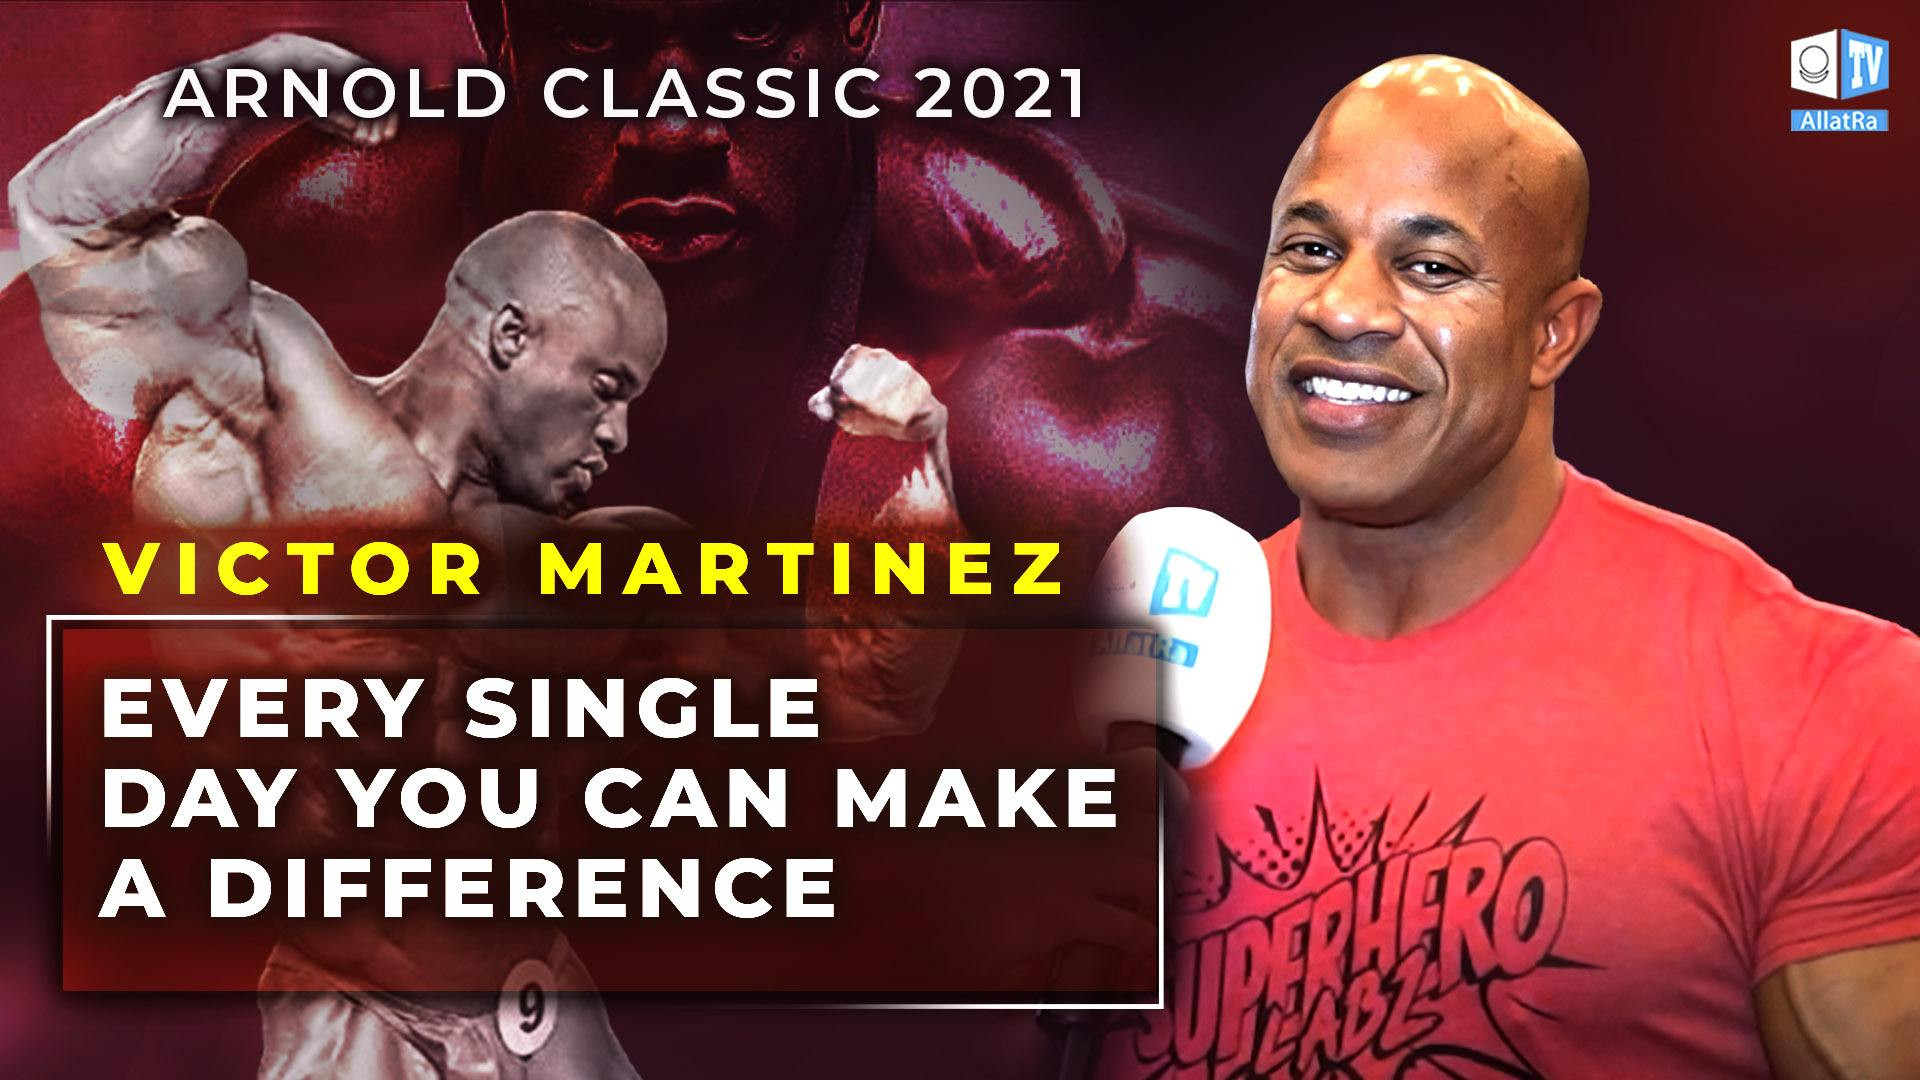 Victor Martinez on Health, Fitness and Creative Society | Arnold Classic 2021